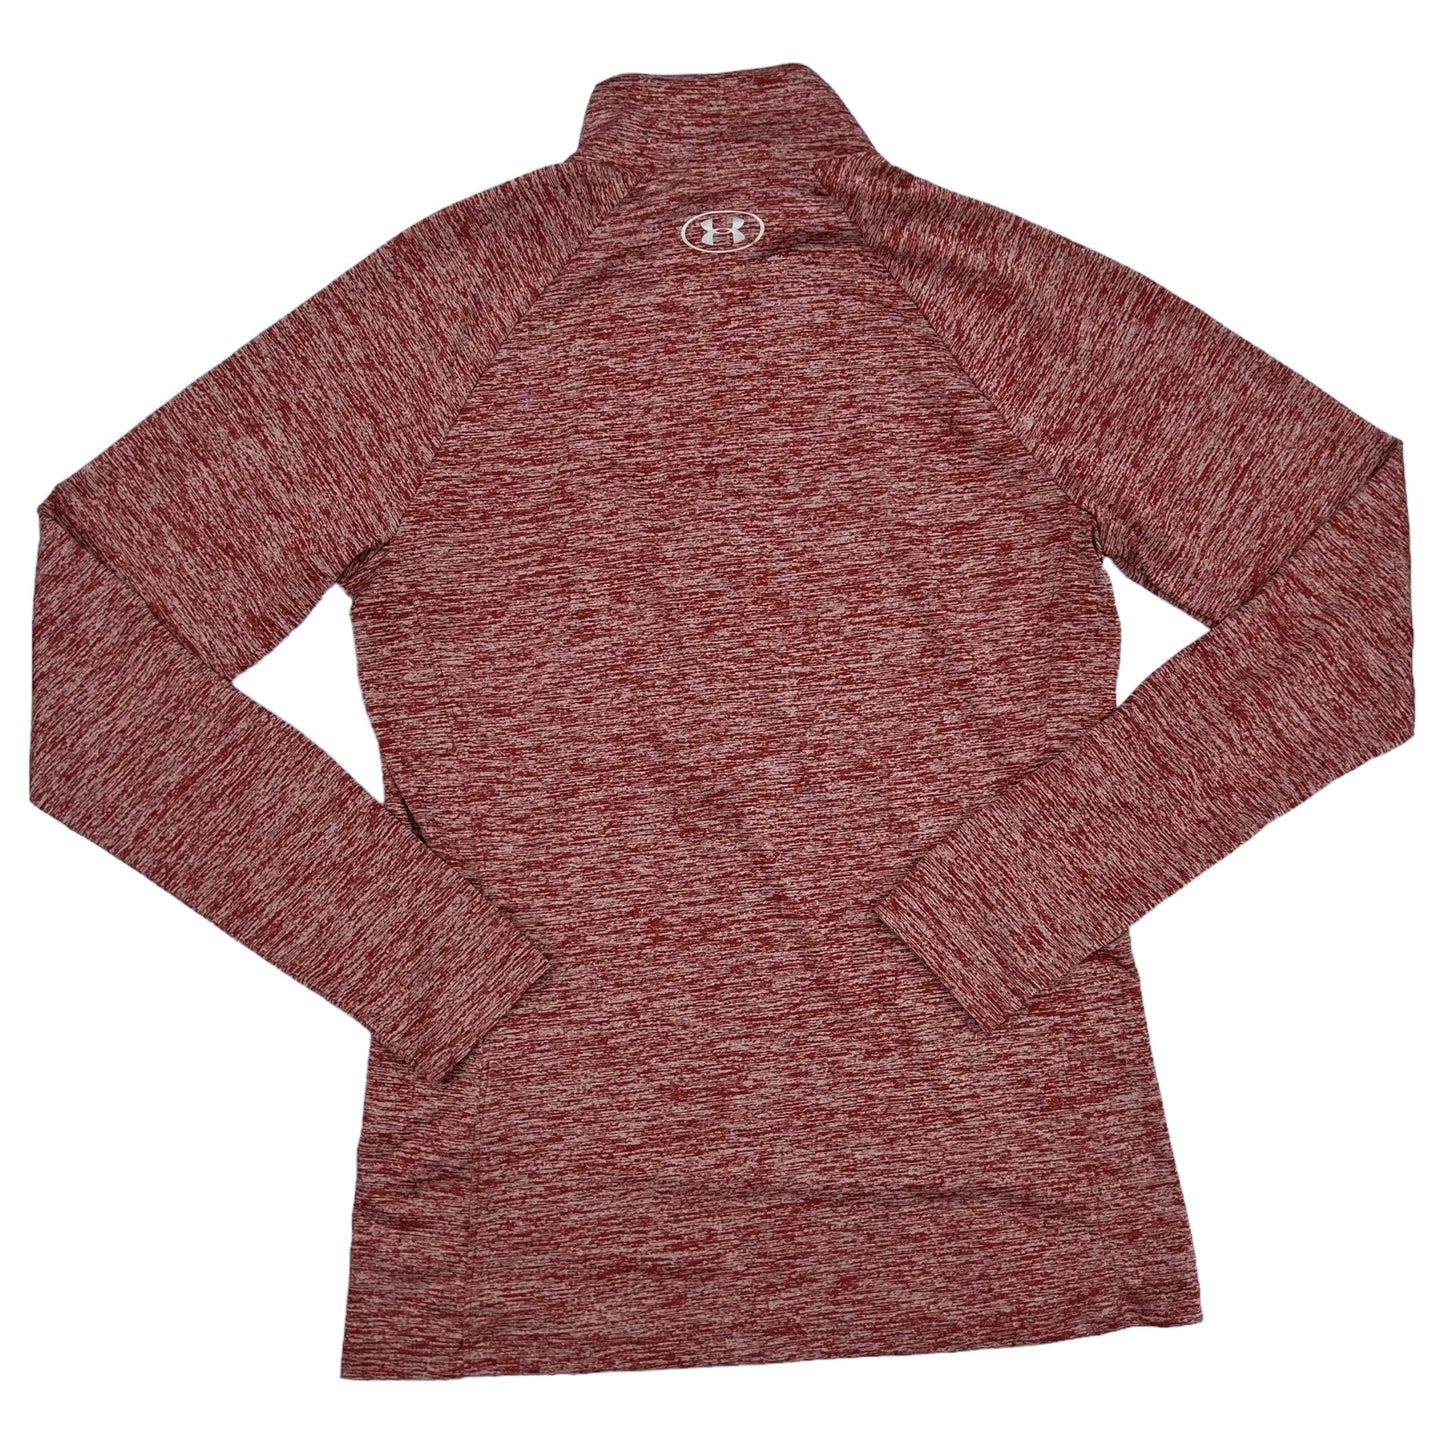 Athletic Top Long Sleeve Collar By American Eagle  Size: S